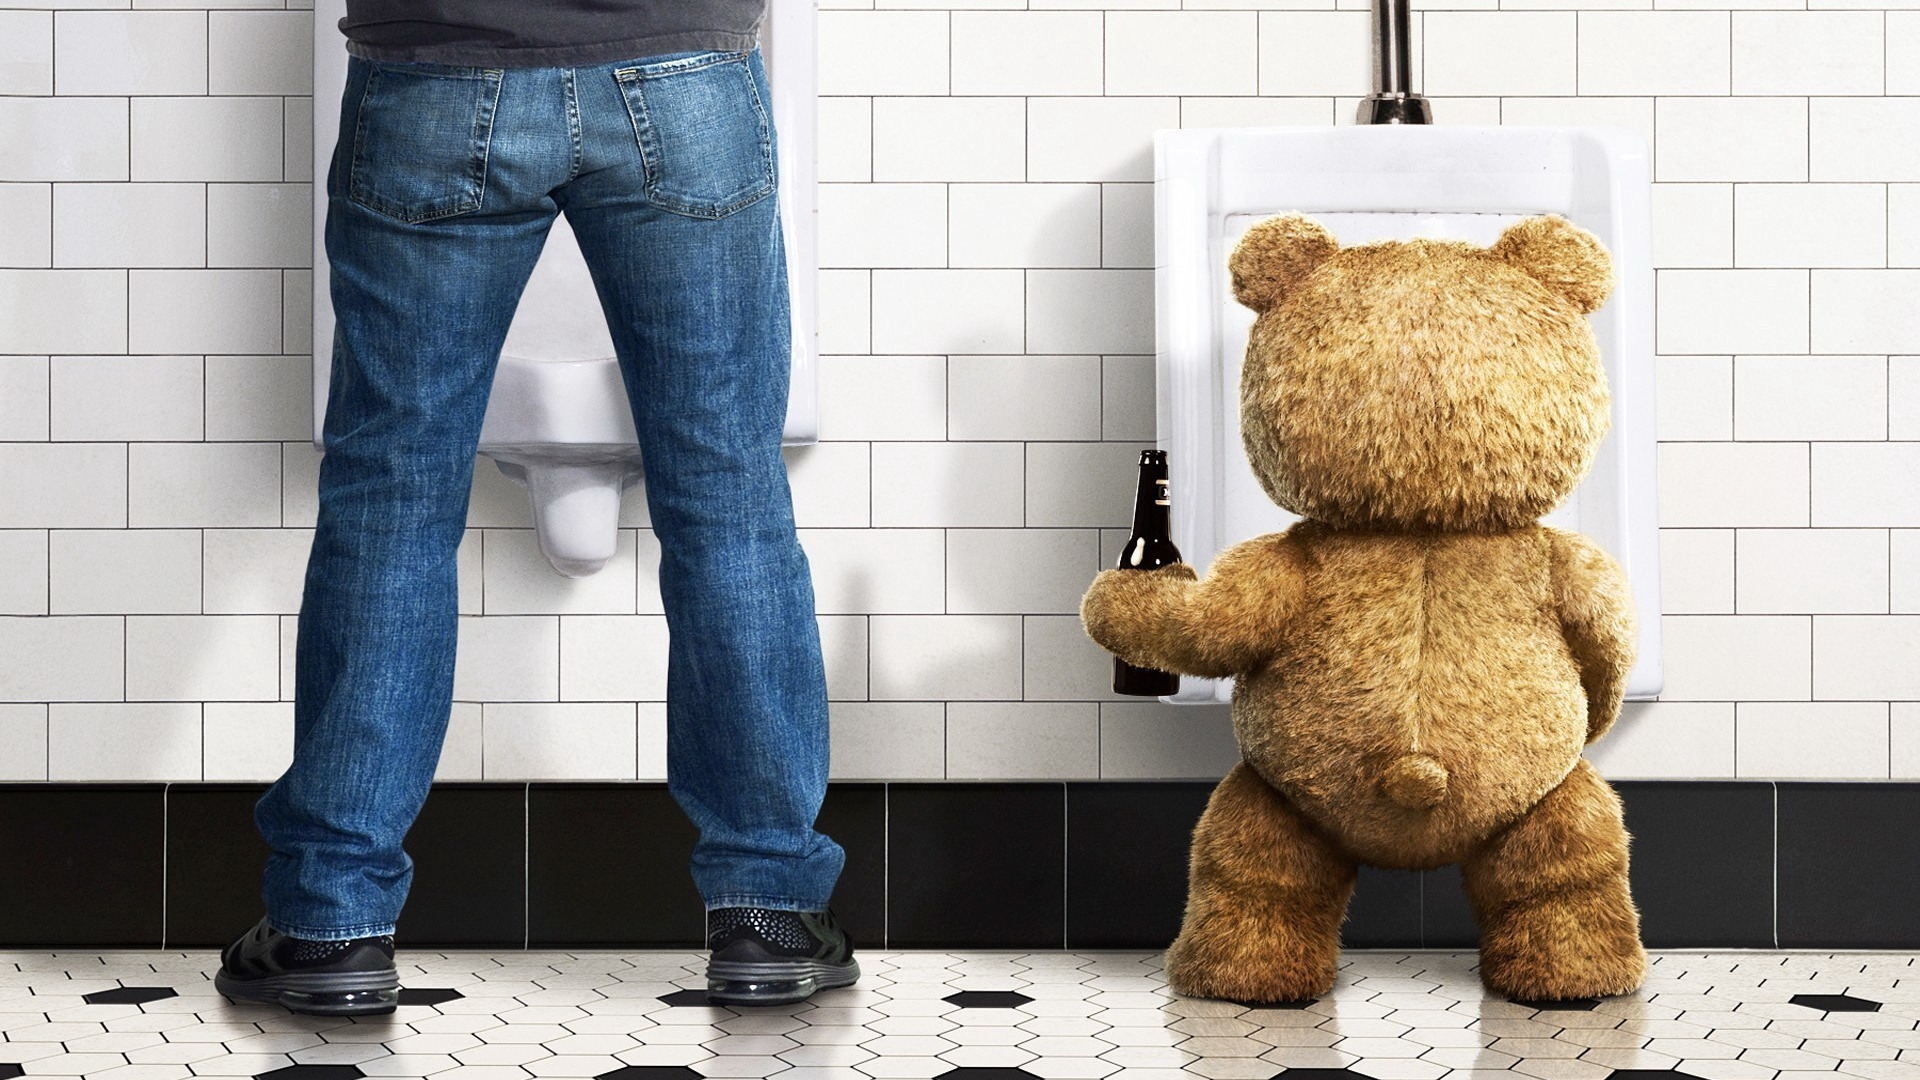 Ted Movie Hd Wallpaper Wallpaperfx